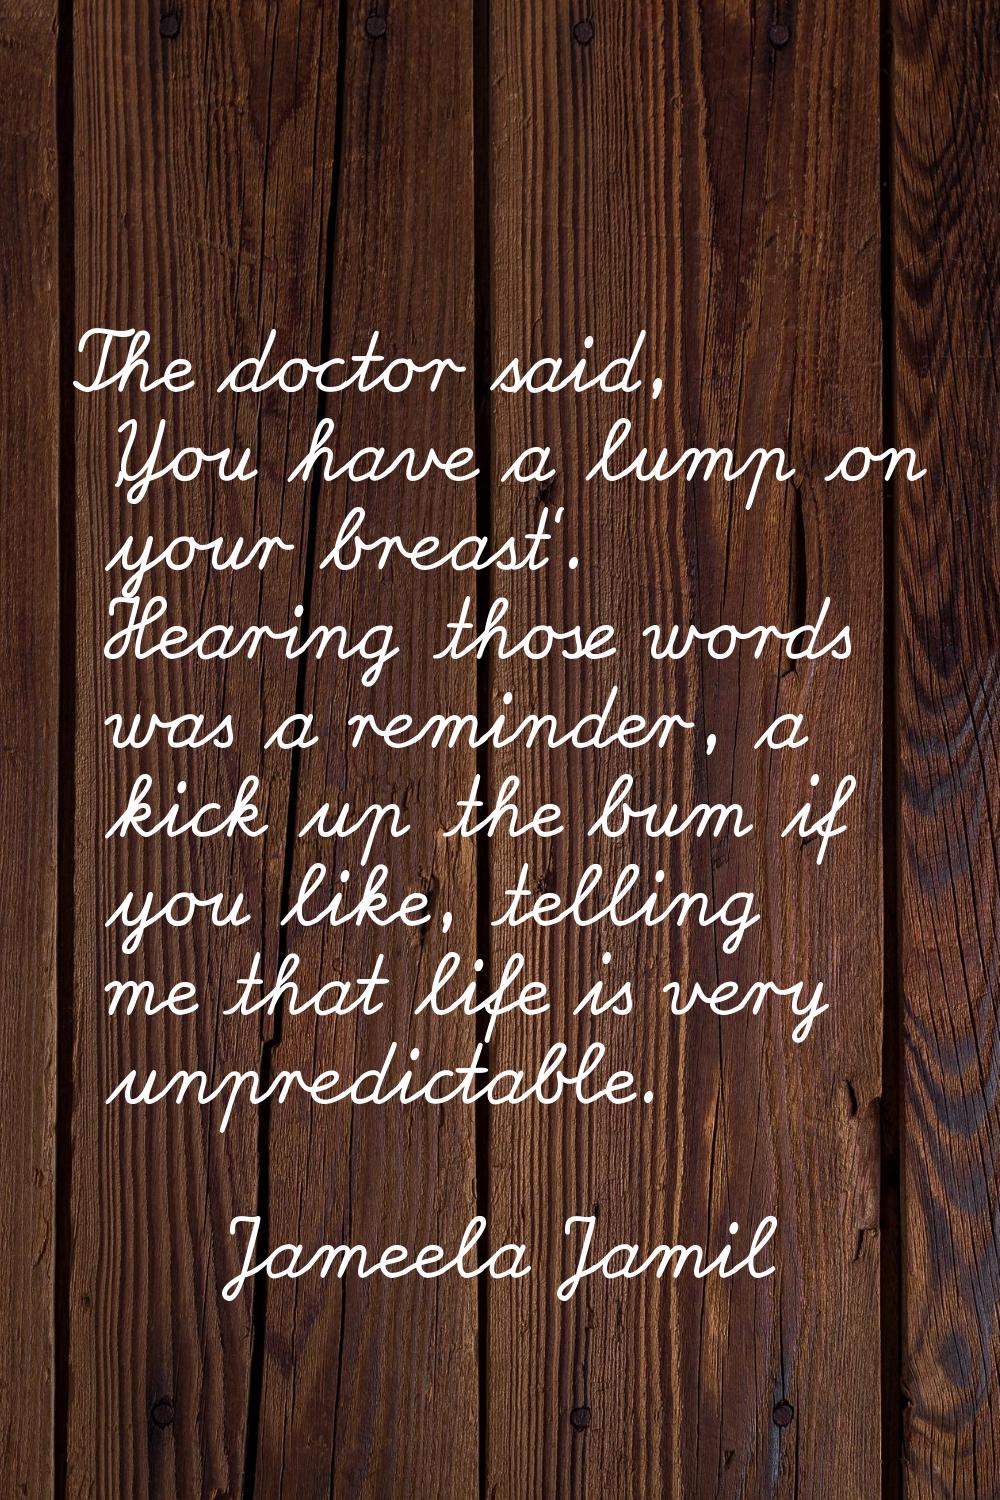 The doctor said, 'You have a lump on your breast'. Hearing those words was a reminder, a kick up th